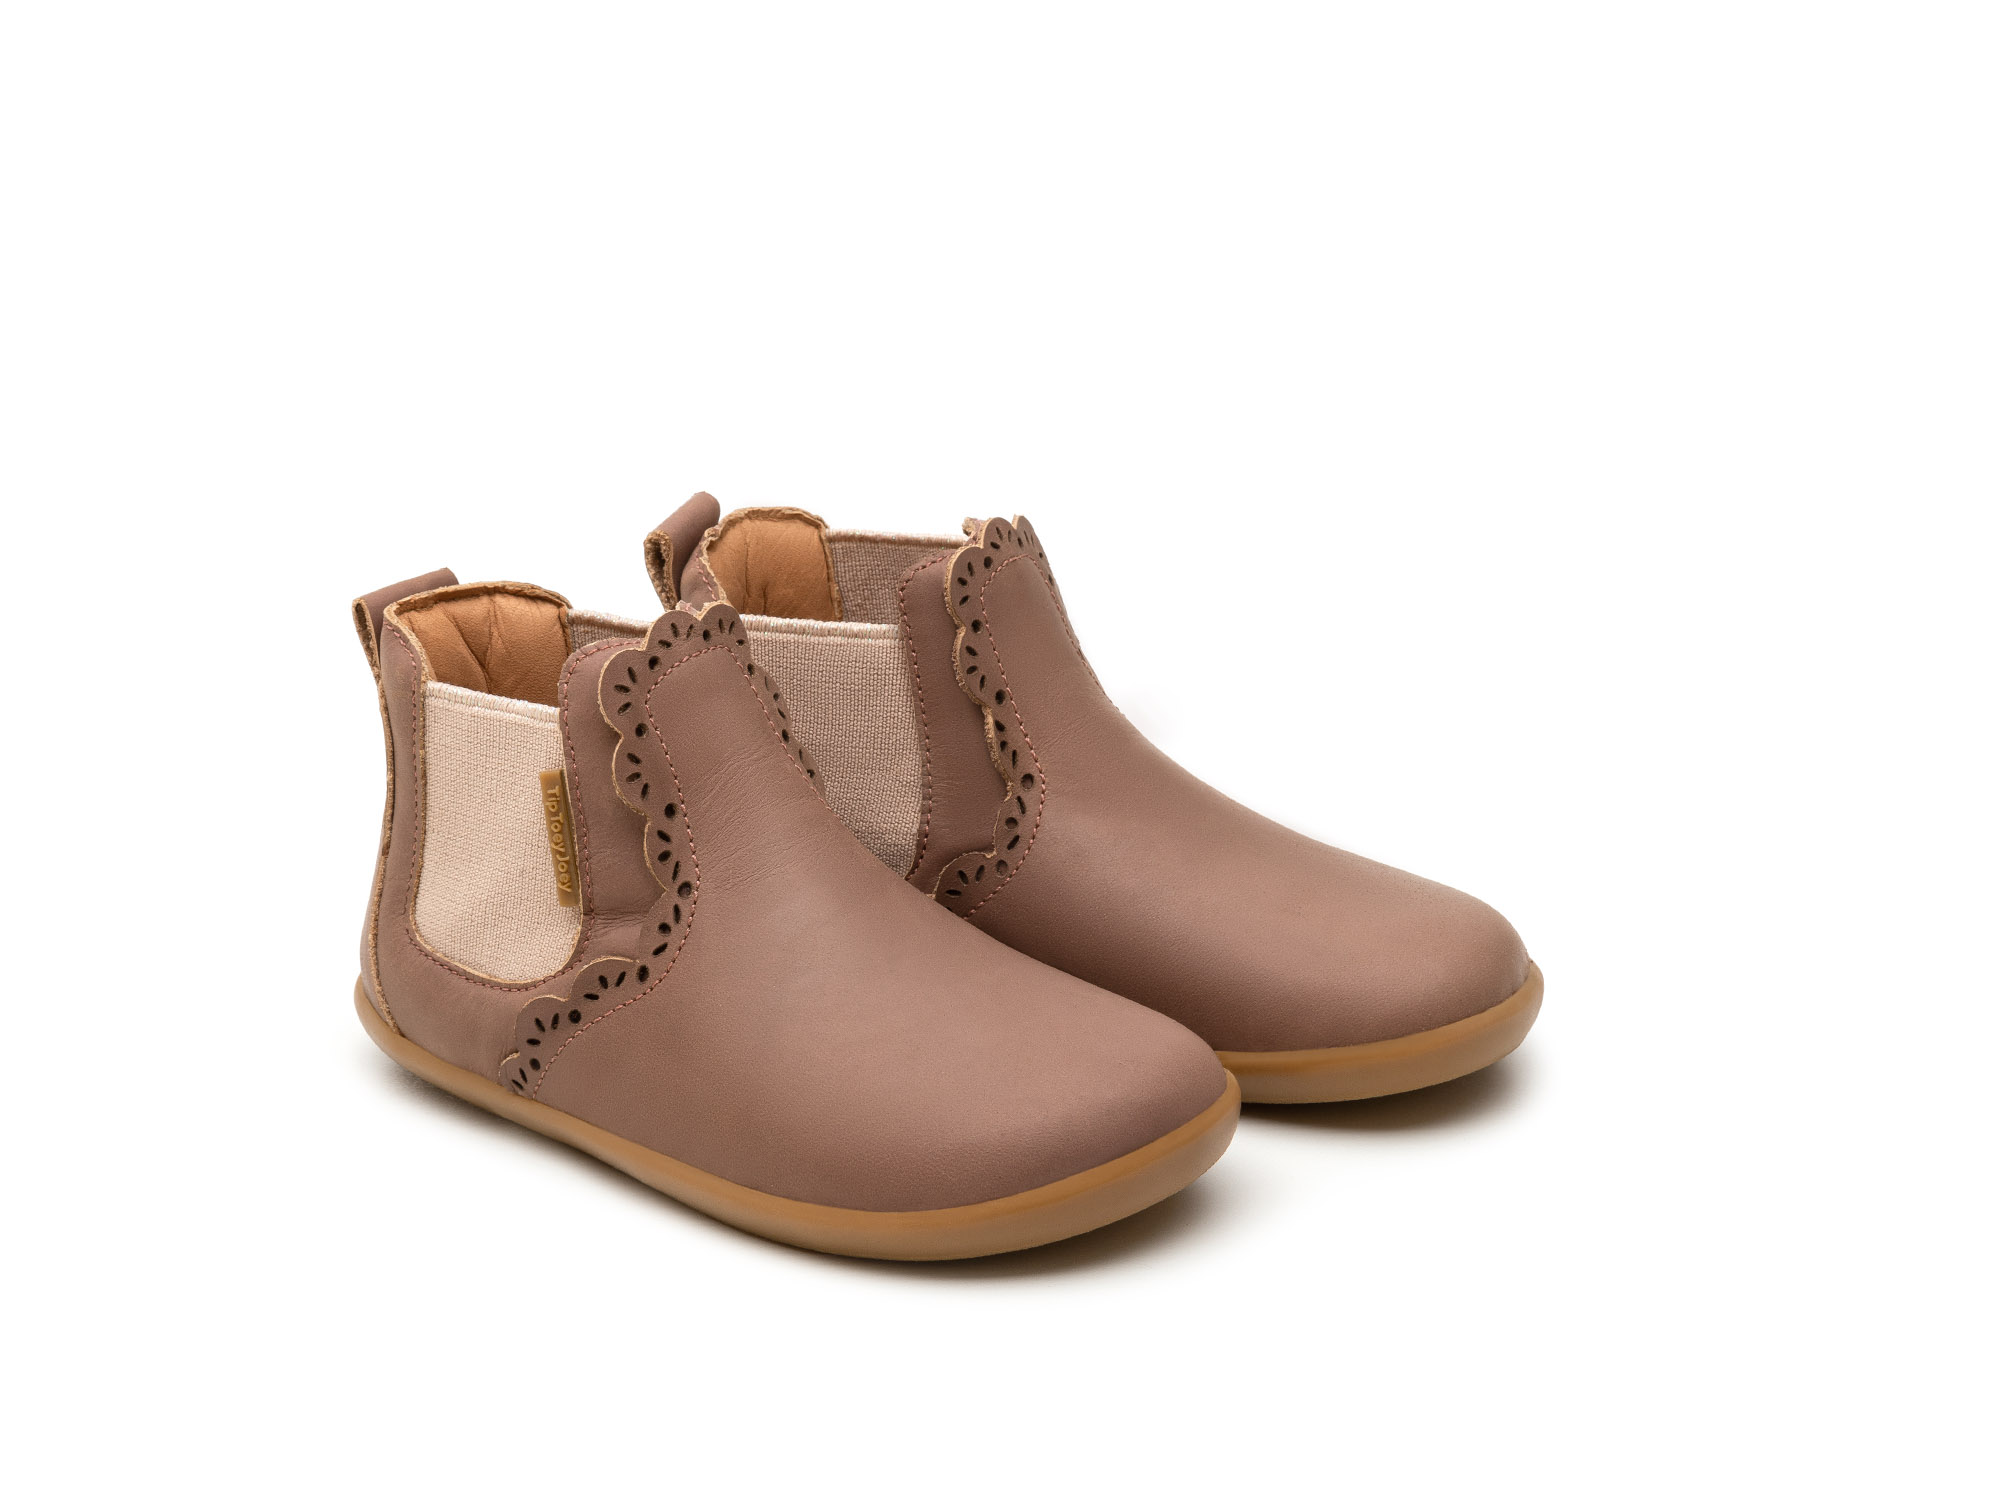 RUN & PLAY Boots for Girls Little Lace | Tip Toey Joey - Australia - 0